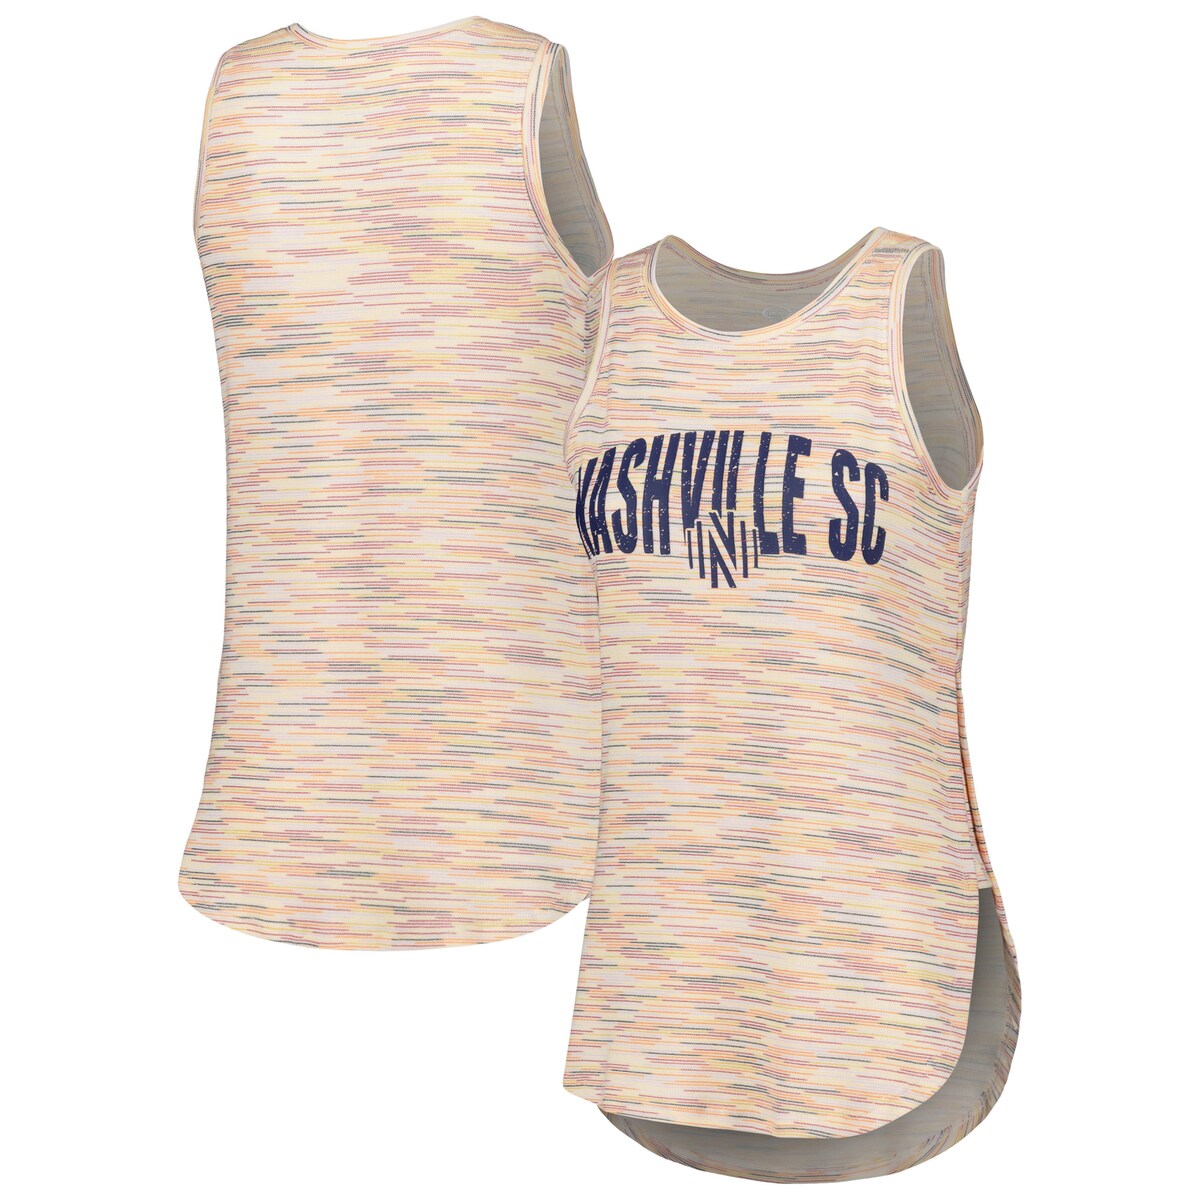 Showcase a sporty look and proudly wave the Nashville SC flag each time you reach for this Sunray tank top from Concepts Sport. Featuring distressed graphics for a lived-in look, this tank brings club spirit to your next outing. The side cut-out offers optimal breathability and ease of movement, which makes this top perfect for cheering your club on the pitch.Officially licensedMachine wash, tumble dry lowDistressed screen print graphicsSublimated designSleevelessImportedMaterial: 60% Rayon/37% Polyester/3% SpandexCrew neckBrand: Concepts SportRounded hem with side splitsSide cut-out at hem